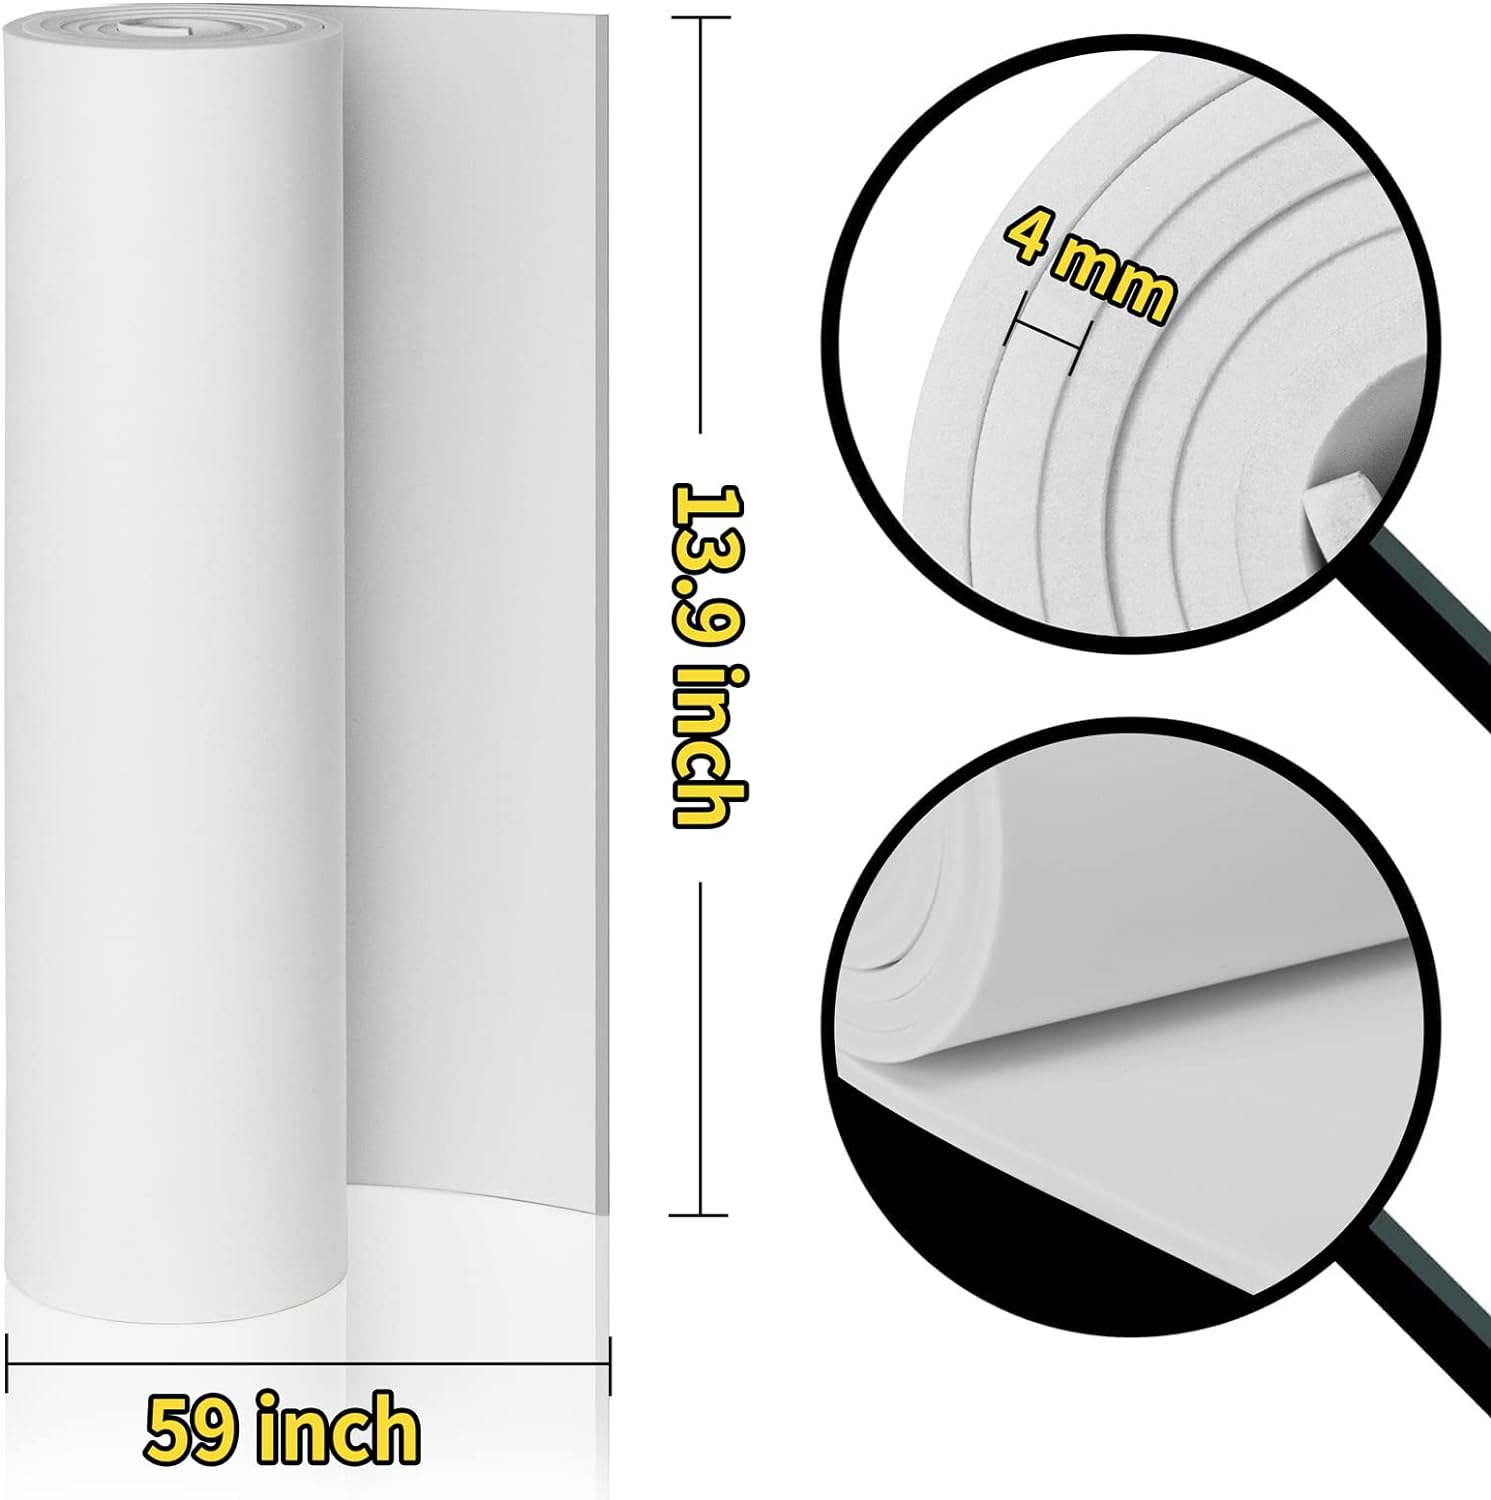 White Eva Foam Cosplay Sheet Premium Eva Foam 4mm Thick 59"X13.9" High Density 86kg/m3 For Cosplay Costume Crafts DIY Projects By PAIDU